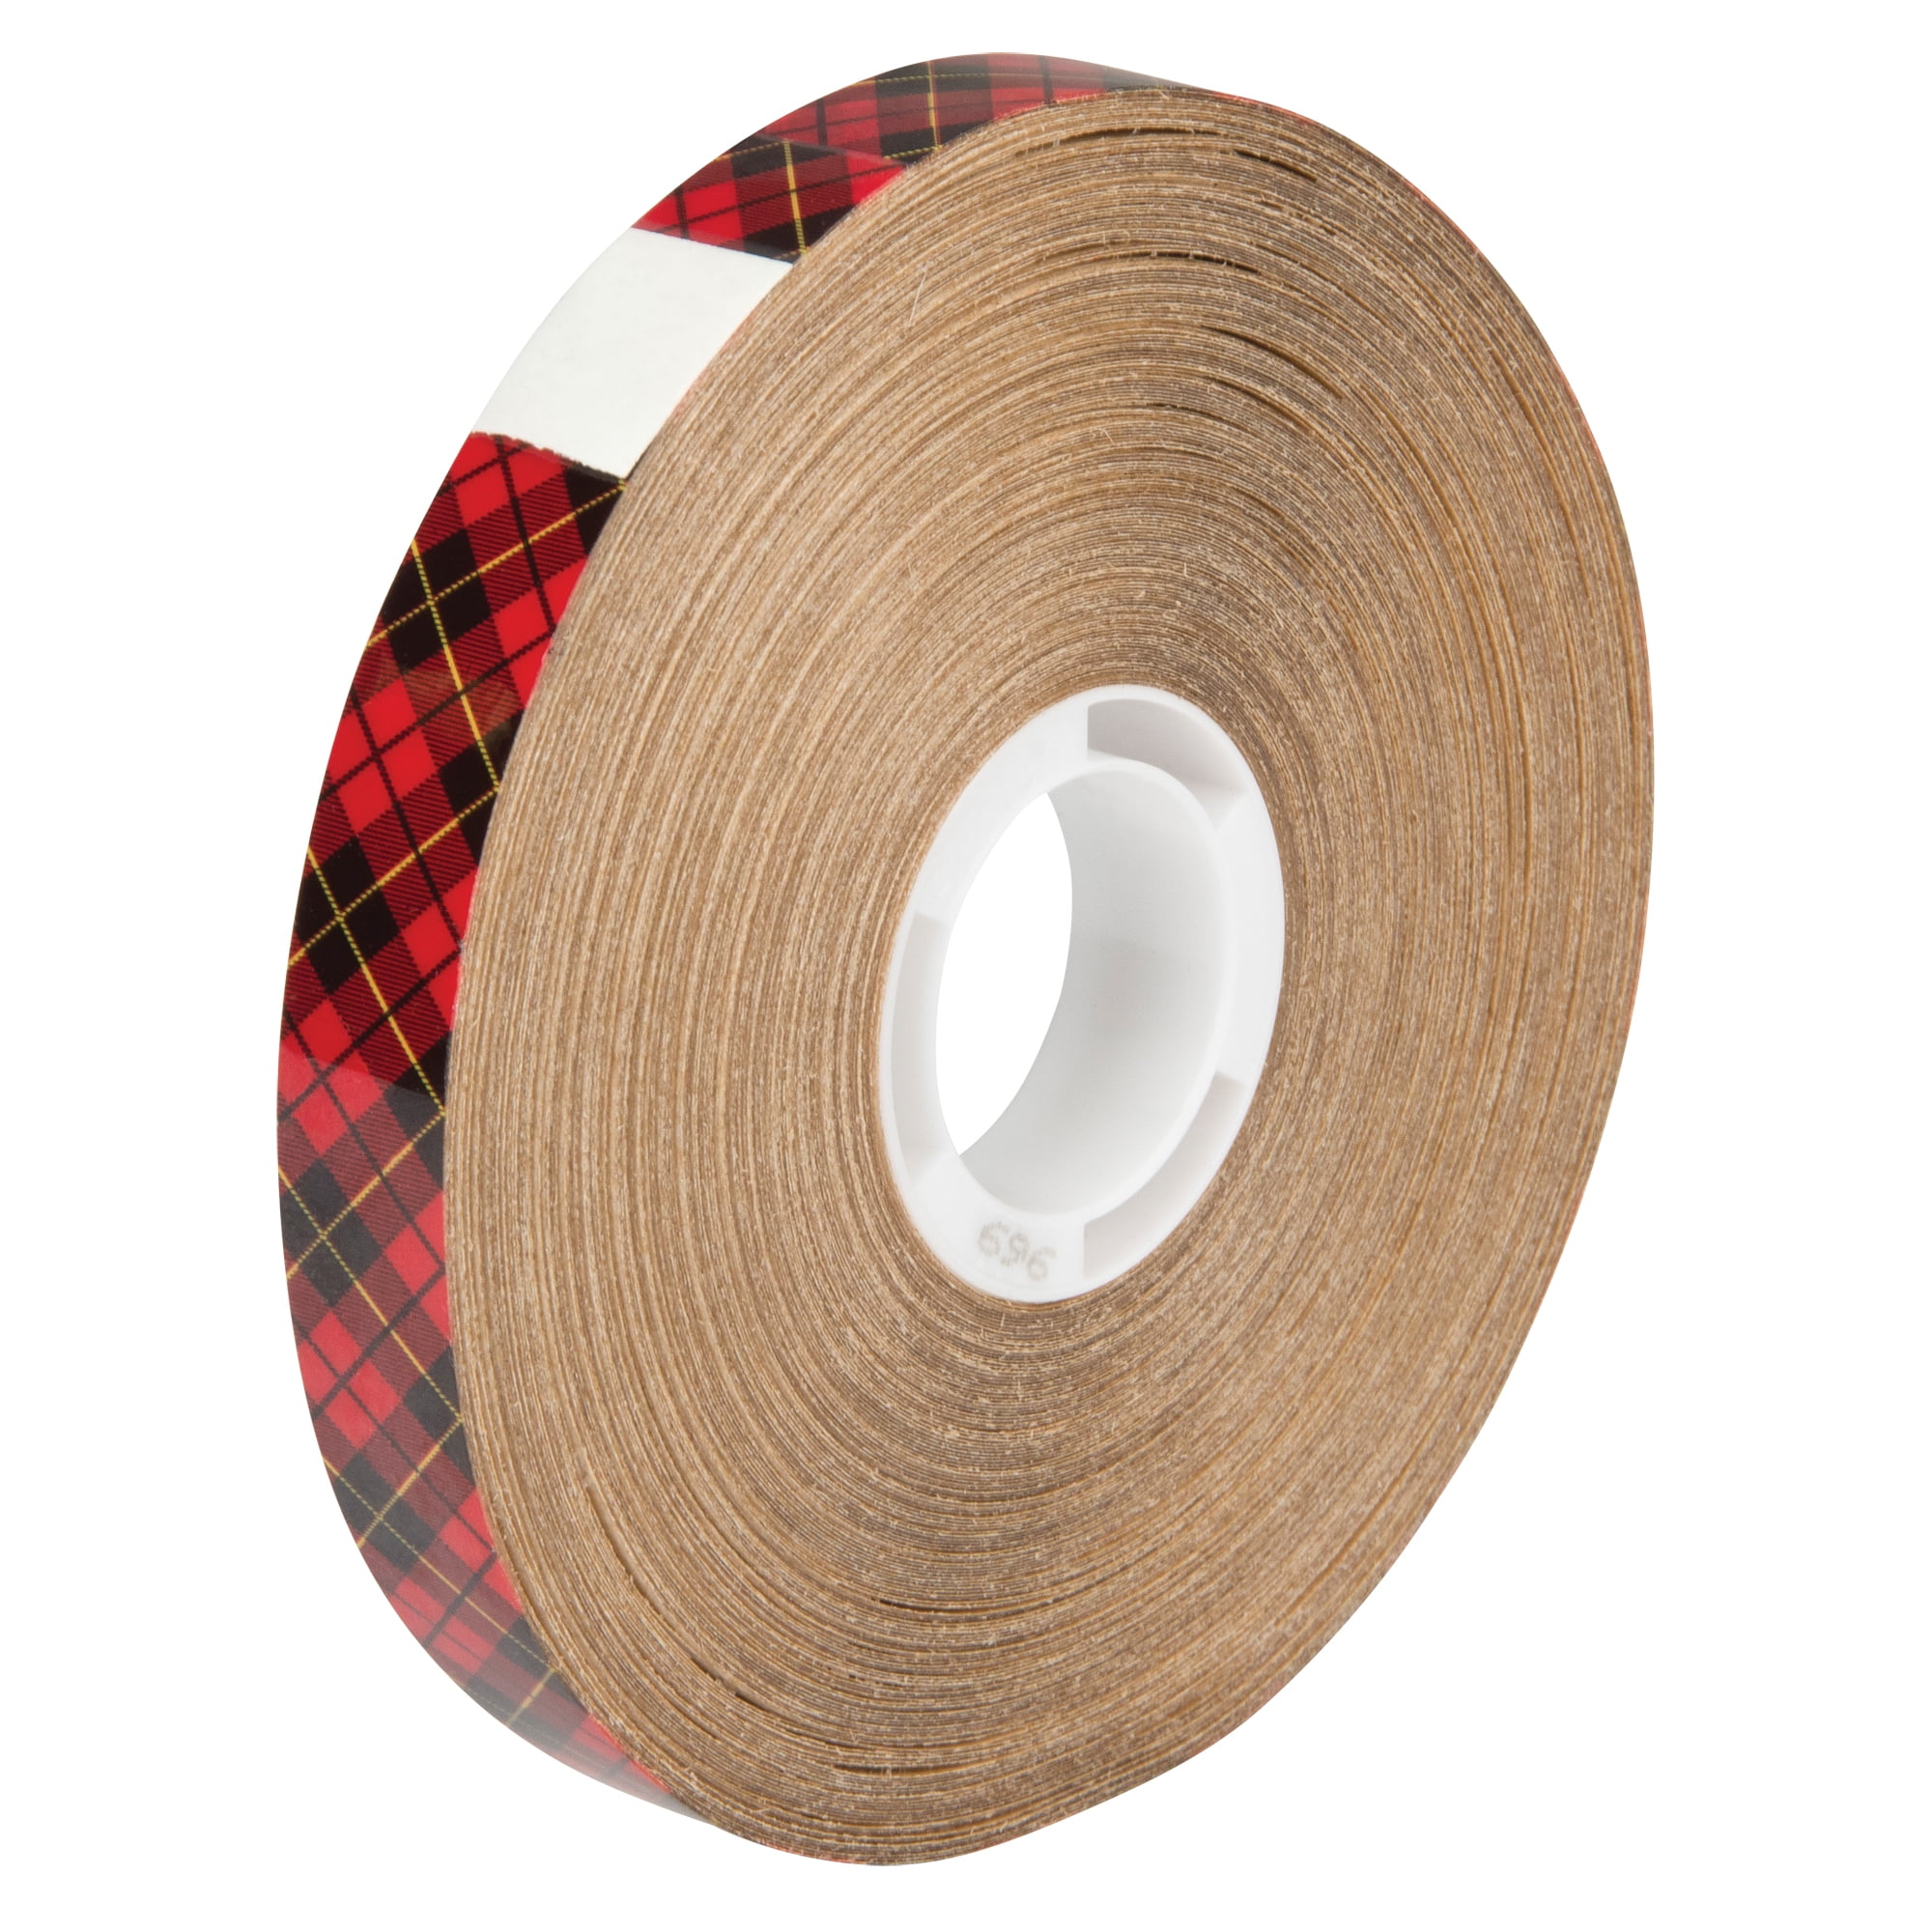 150mm WIDE ROLL APP TAPE APPLICATION TRANSFER TAPE PAPER OR CLEAR MEDIUM TACK